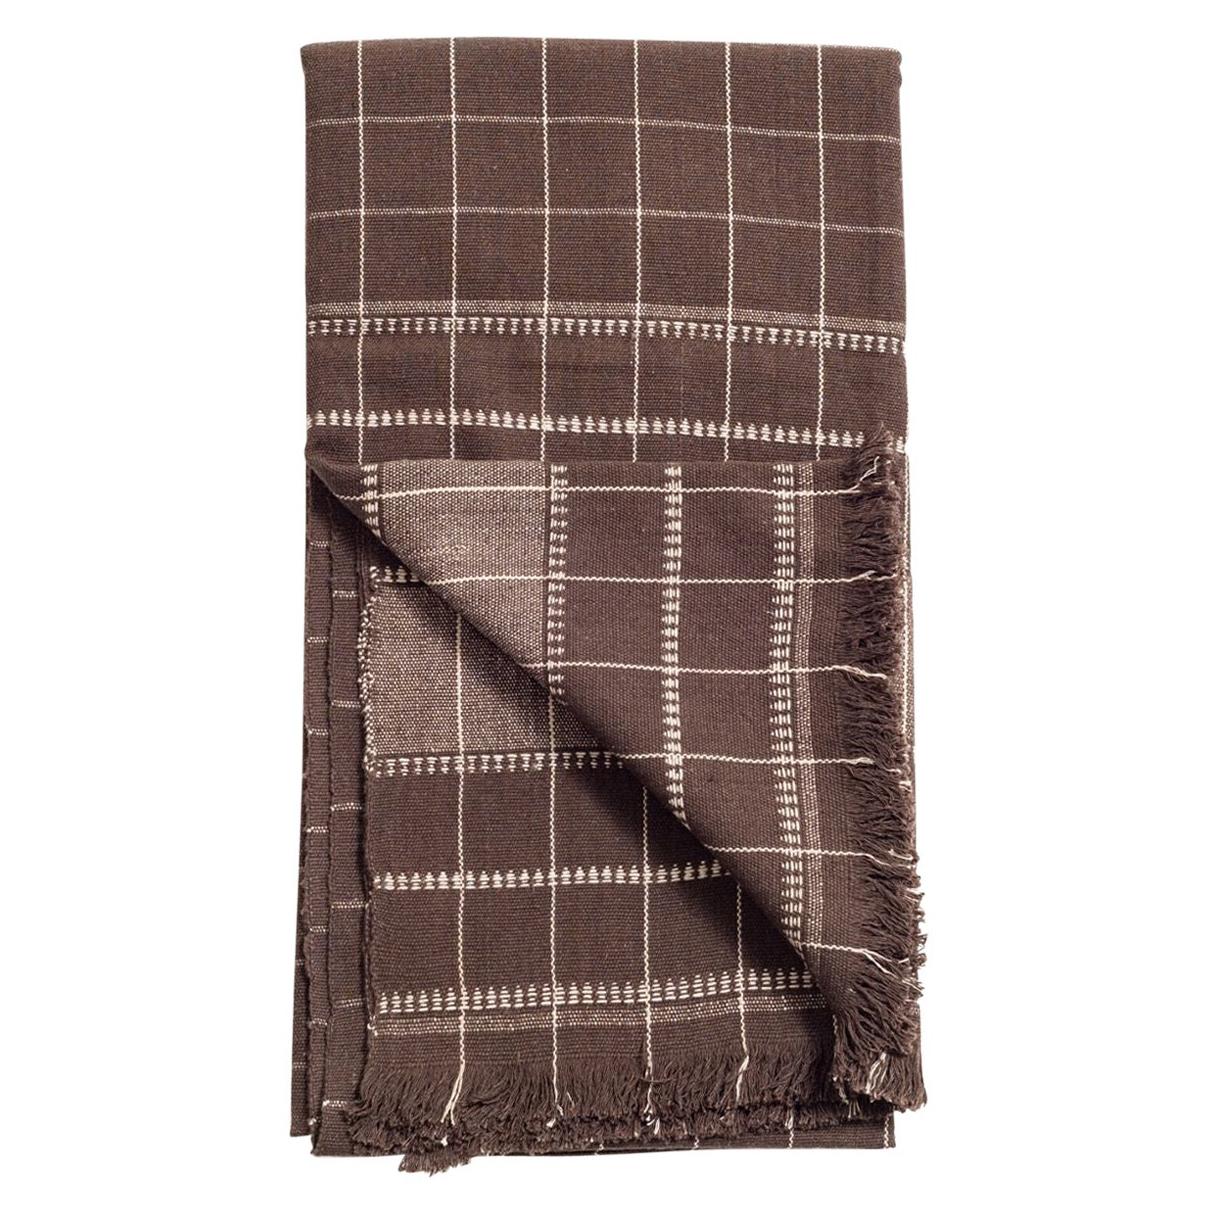 Treacle Dark Brown Handloom Queen Size Bedspread / Coverlet Soft Organic Cotton For Sale